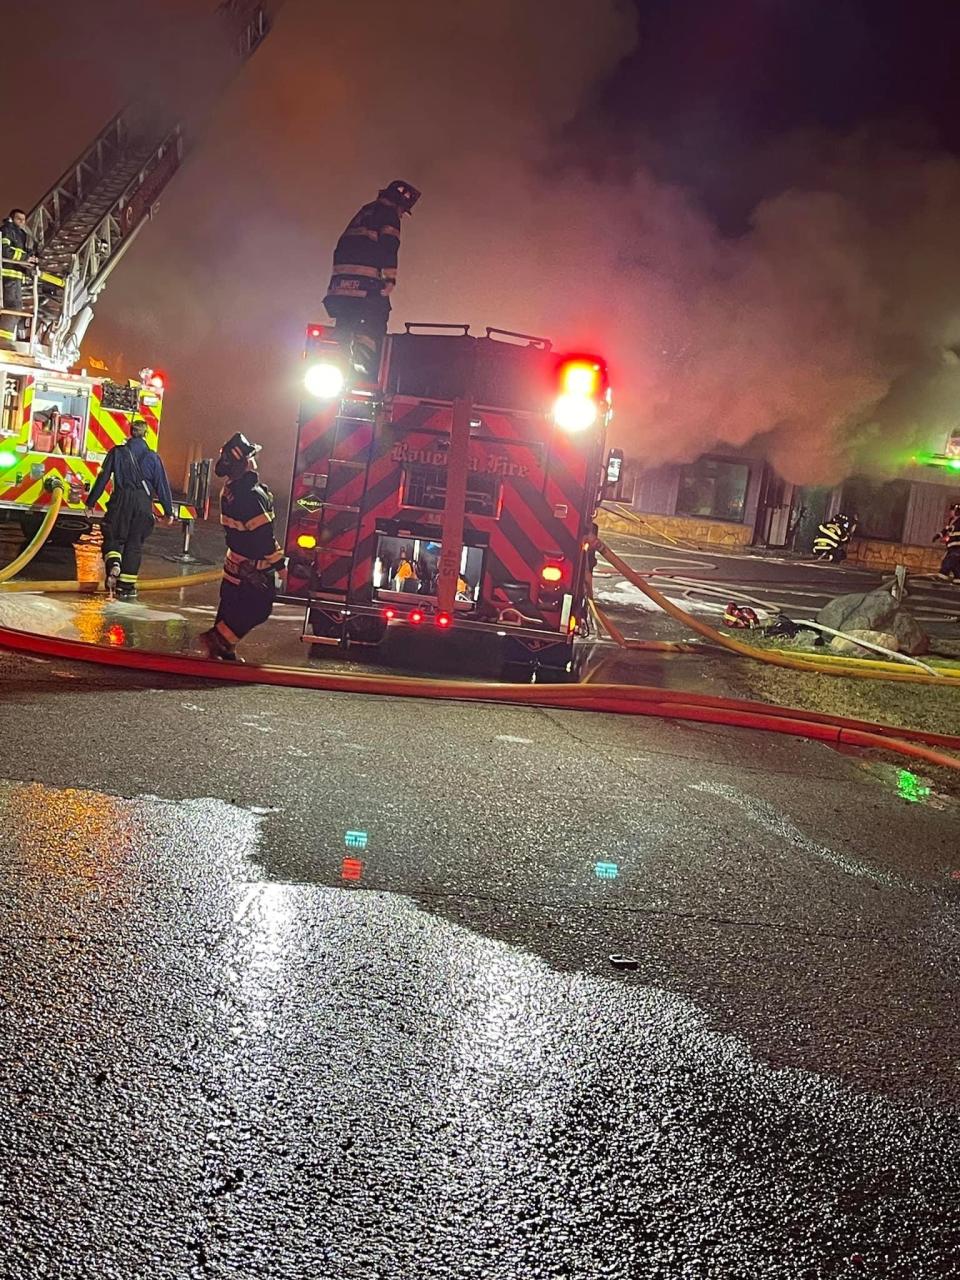 Fire crews from throughout Portage County battled a fire at a Charlestown business Thursday night.